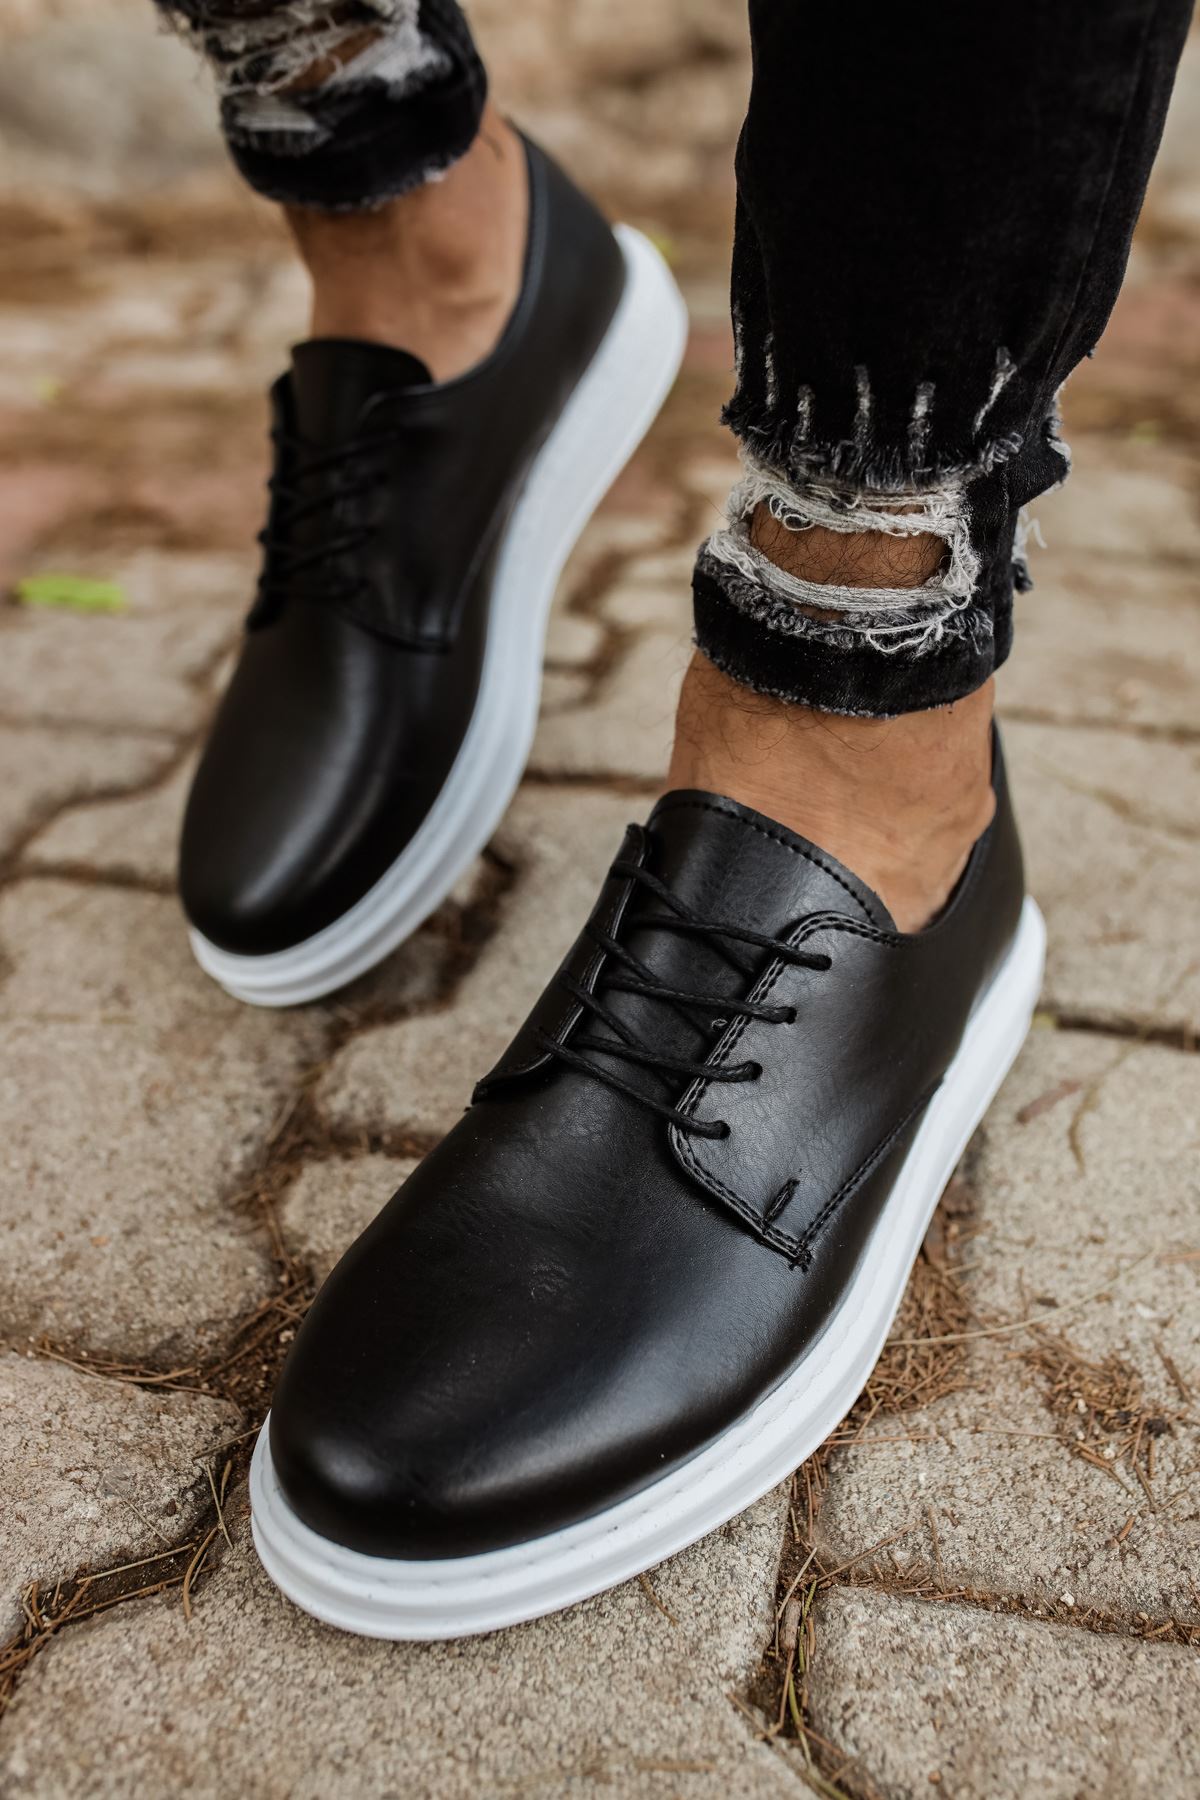 Chekich Classic Matte Black Men's Shoes Wedding For Suit Lace-Up Non-Leather Business Wear Casual Daily 2021 Spring and Autumn Fashion Solid Base Footwear Wedding Male Sneakers Air Sewing Details CH003 V5